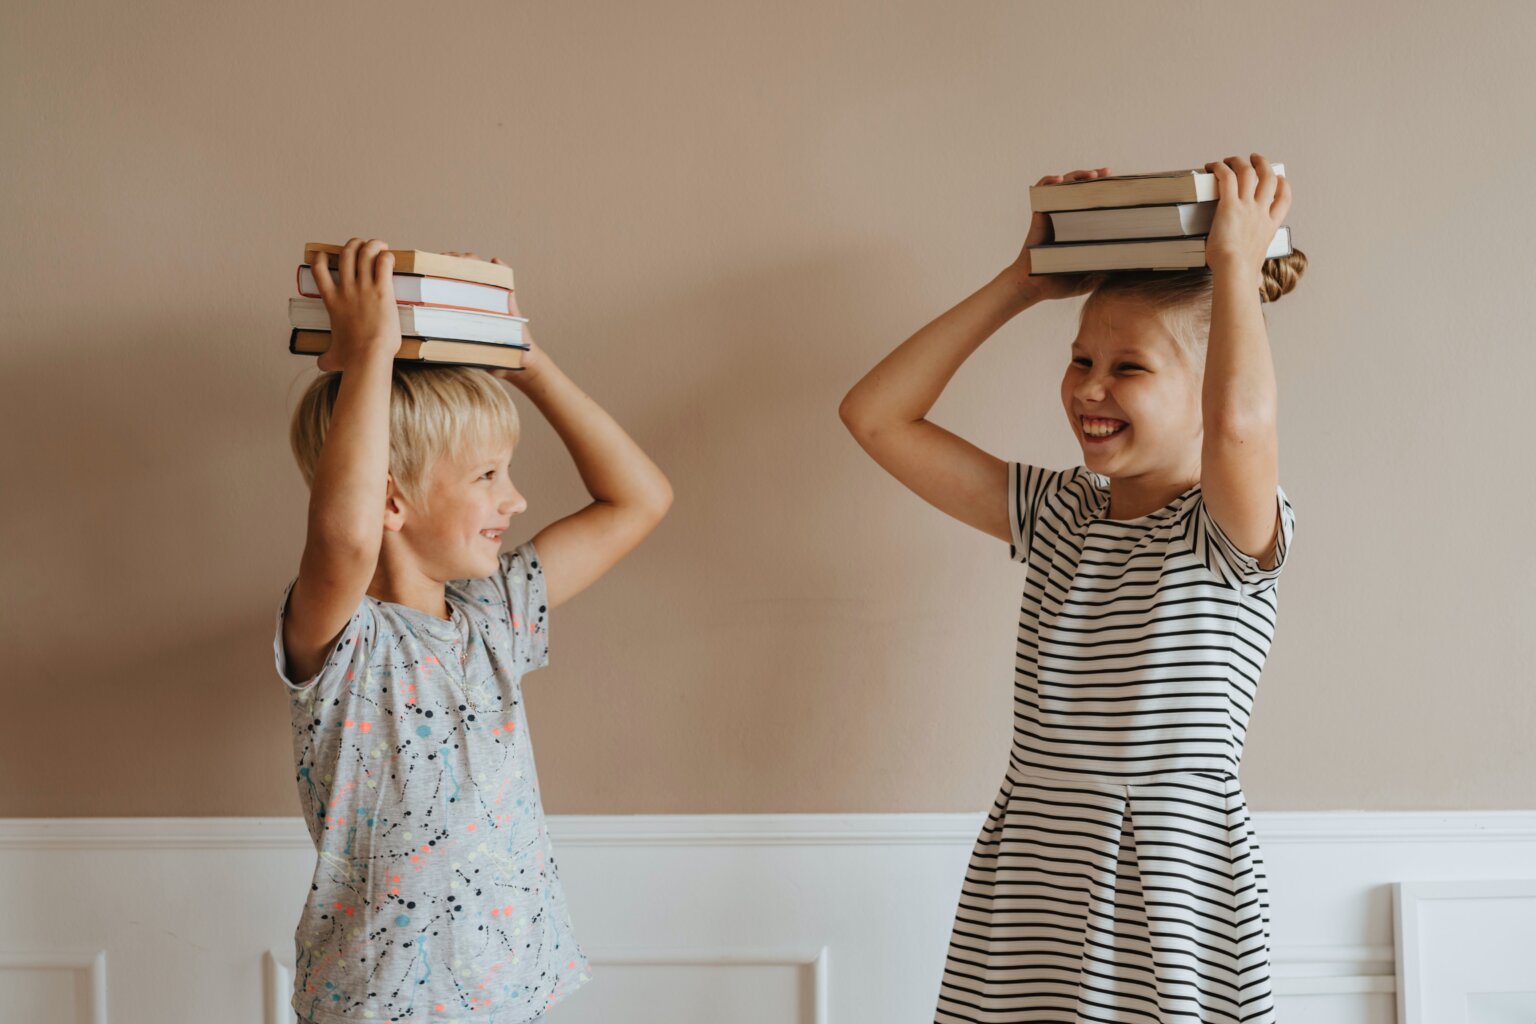 A brother and sister with a stack of books on their heads.